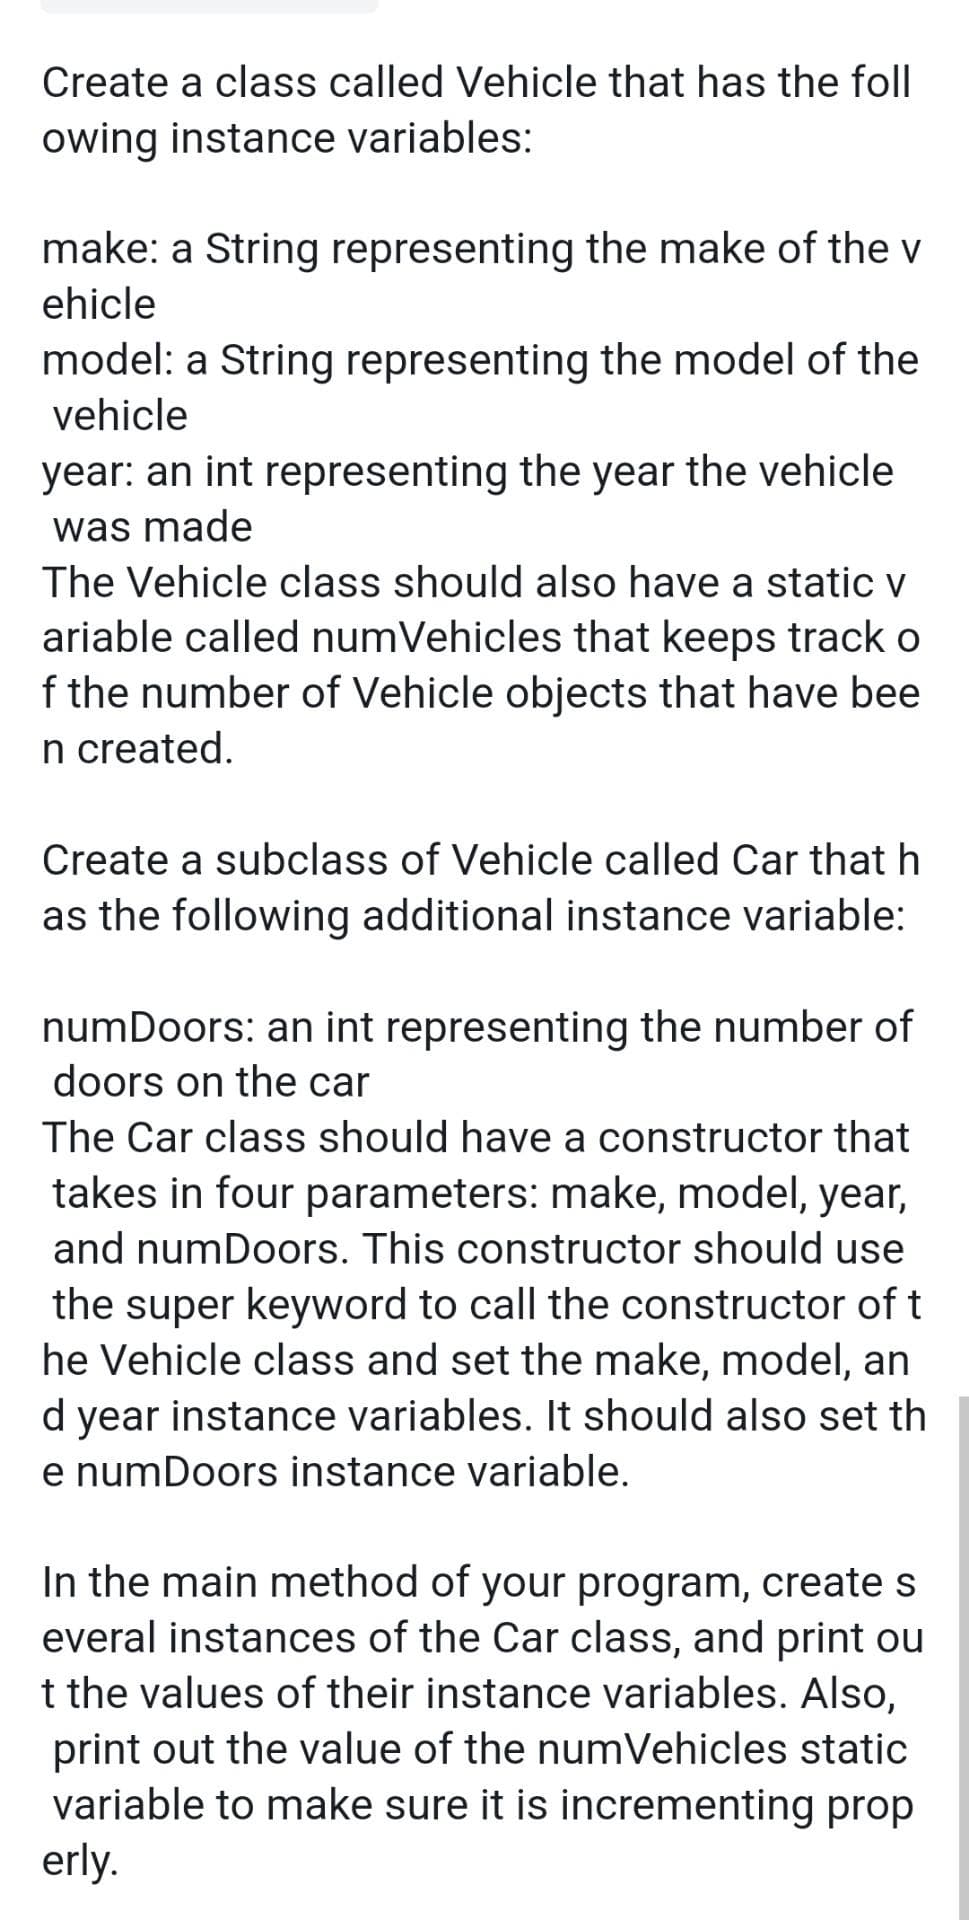 Create a class called Vehicle that has the foll
owing instance variables:
make: a String representing the make of the v
ehicle
model: a String representing the model of the
vehicle
year: an int representing the year the vehicle
was made
The Vehicle class should also have a static v
ariable called numVehicles that keeps track o
f the number of Vehicle objects that have bee
n created.
Create a subclass of Vehicle called Car that h
as the following additional instance variable:
numDoors: an int representing the number of
doors on the car
The Car class should have a constructor that
takes in four parameters: make, model, year,
and numDoors. This constructor should use
the super keyword to call the constructor of t
he Vehicle class and set the make, model, an
d year instance variables. It should also set th
e numDoors instance variable.
In the main method of your program, create s
everal instances of the Car class, and print ou
t the values of their instance variables. Also,
print out the value of the numVehicles static
variable to make sure it is incrementing prop
erly.